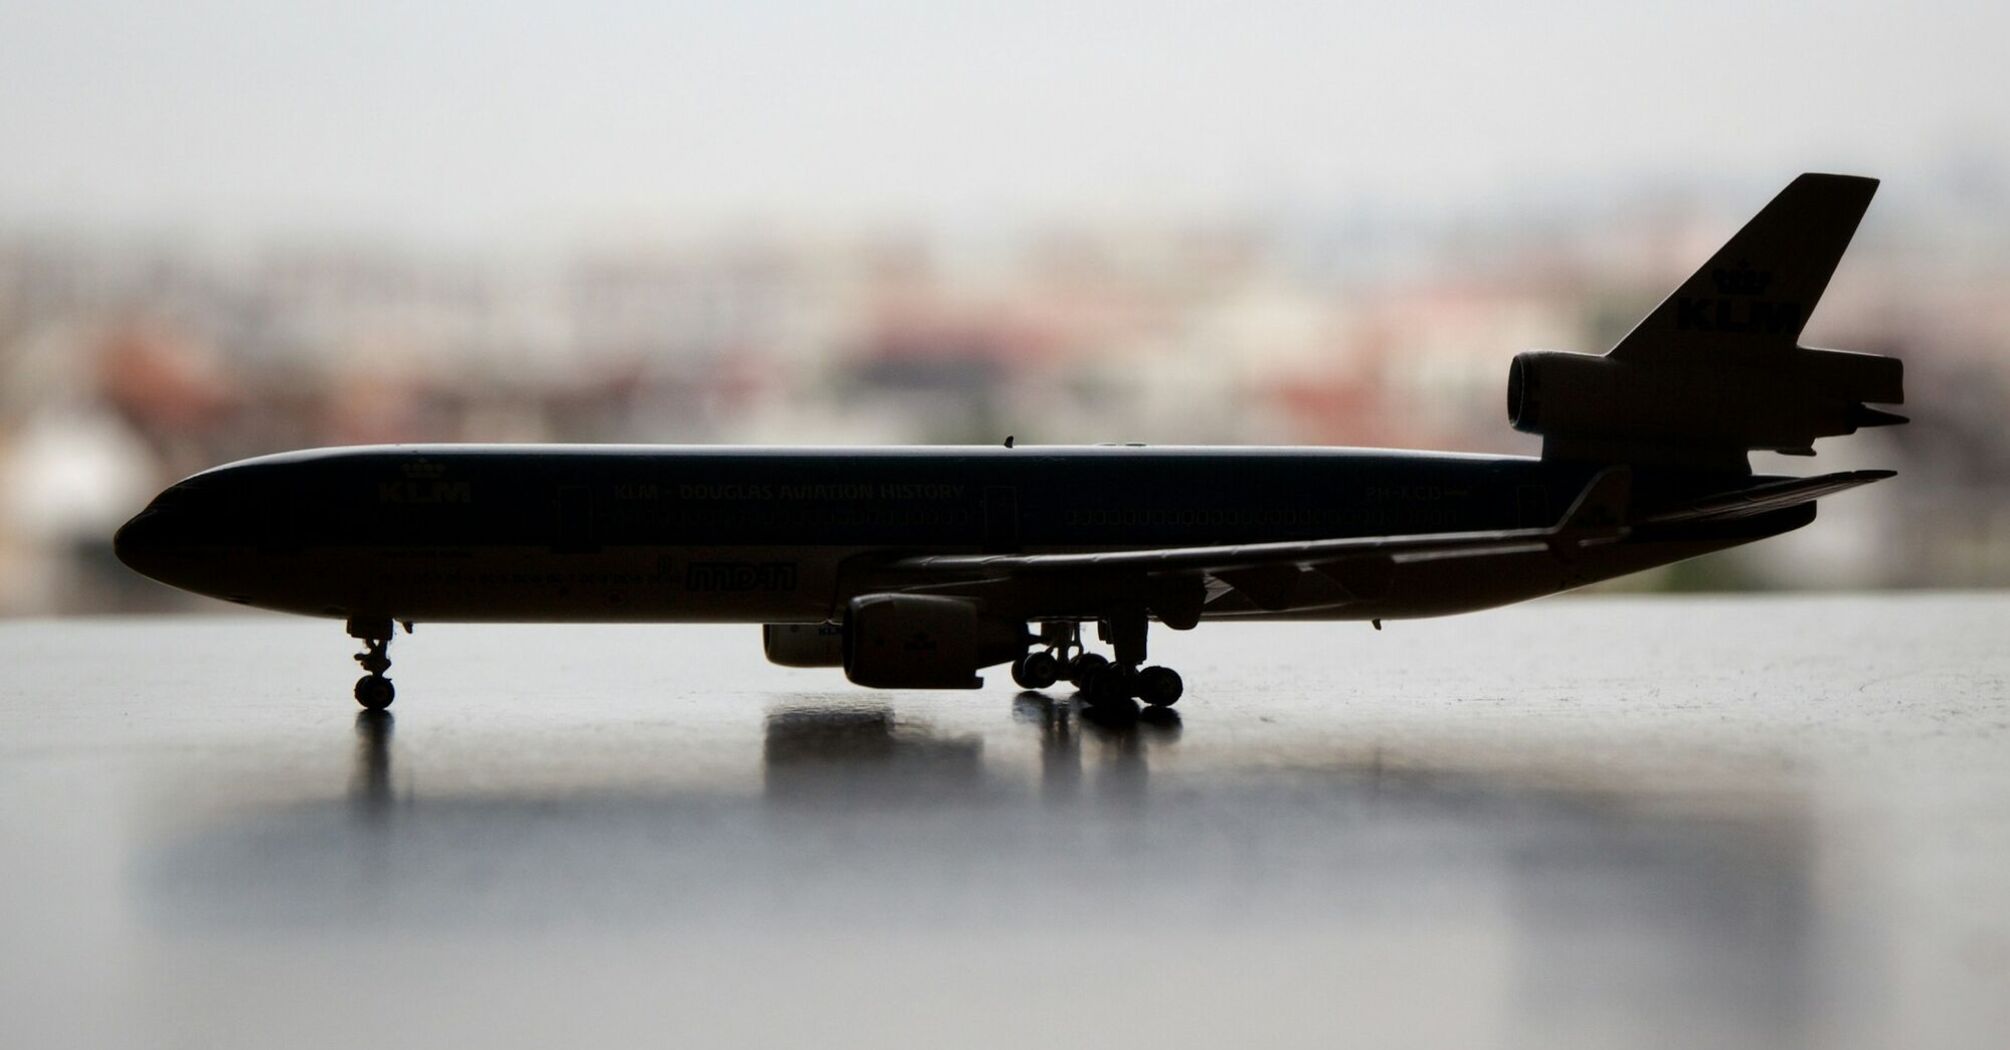 Silhouette of a model airplane against a blurred cityscape